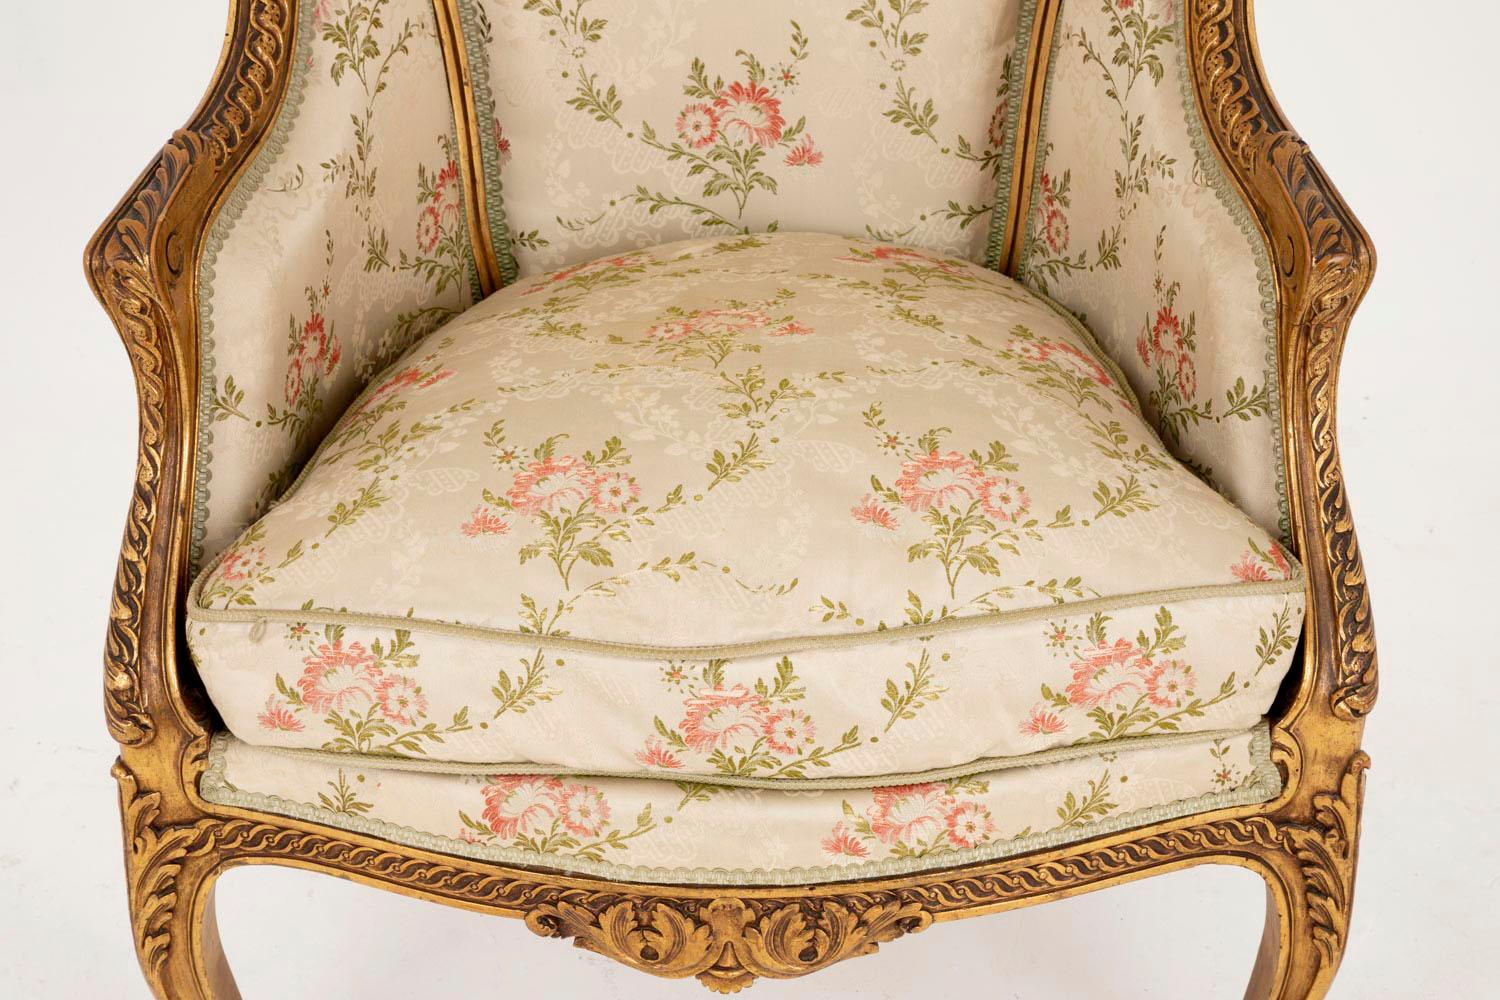 European Transition Style Bergere in Giltwood, circa 1880